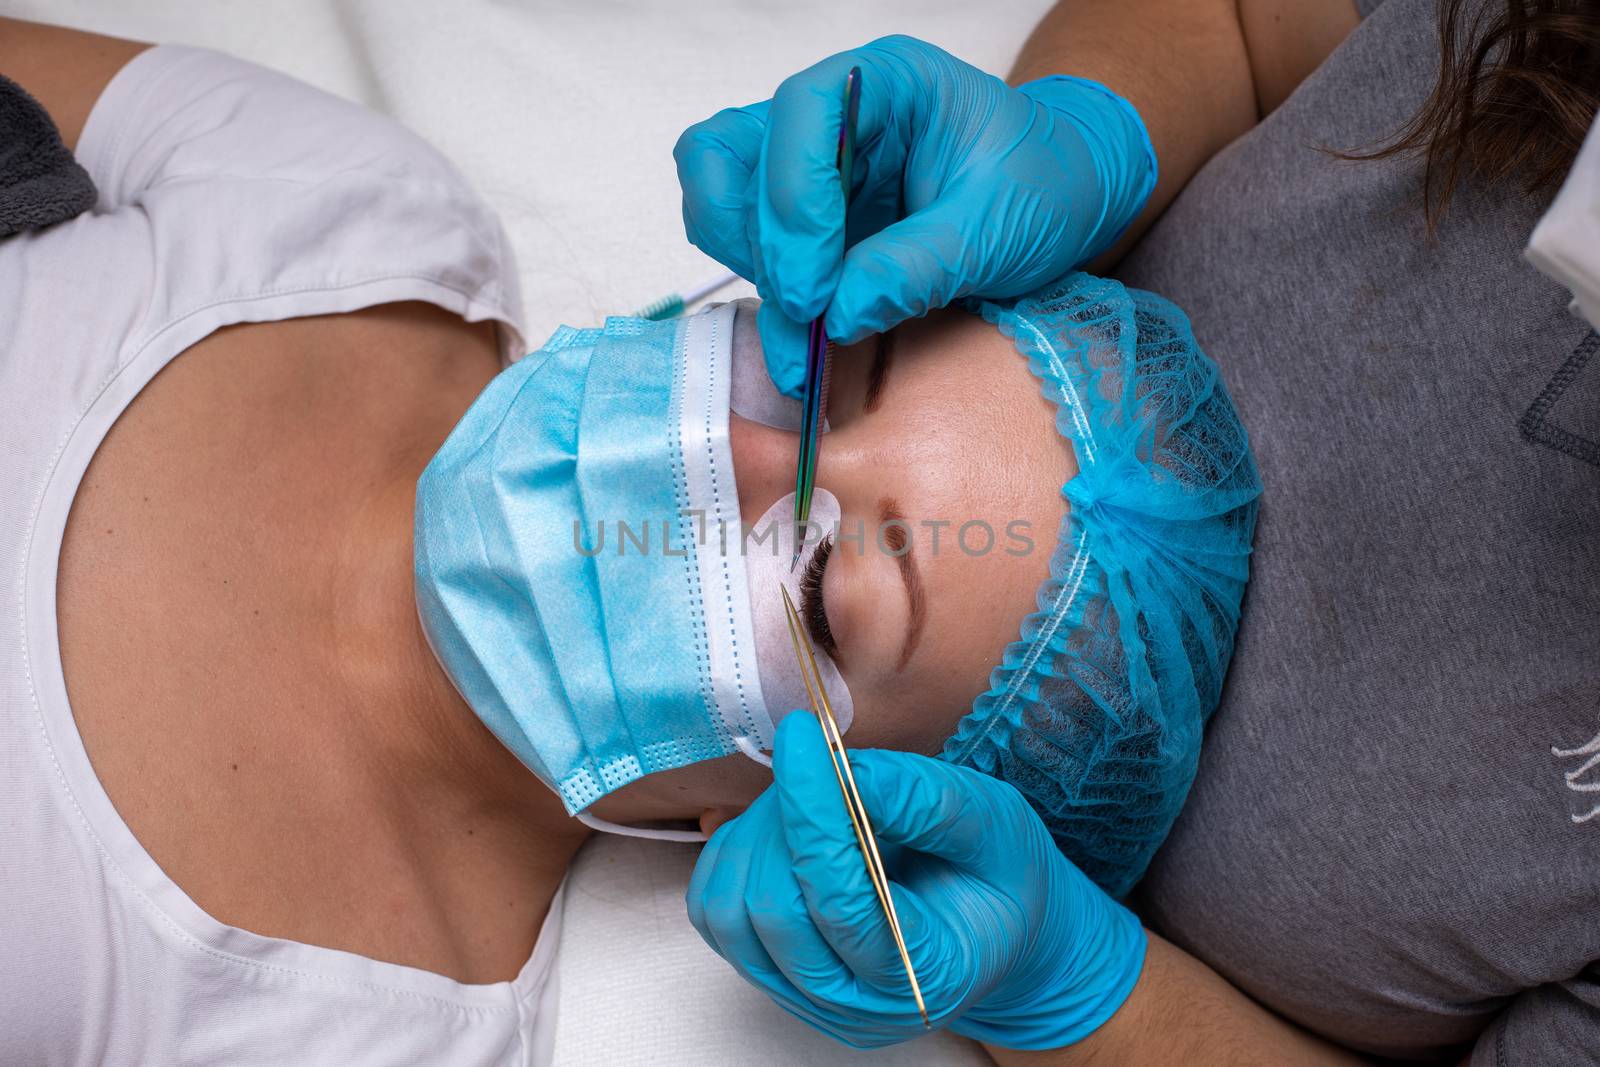 Treatment beauty procedure of upgrade Eyelashes Extension during a pandemic with preventive measures. Woman face wirh protective cap and facemask